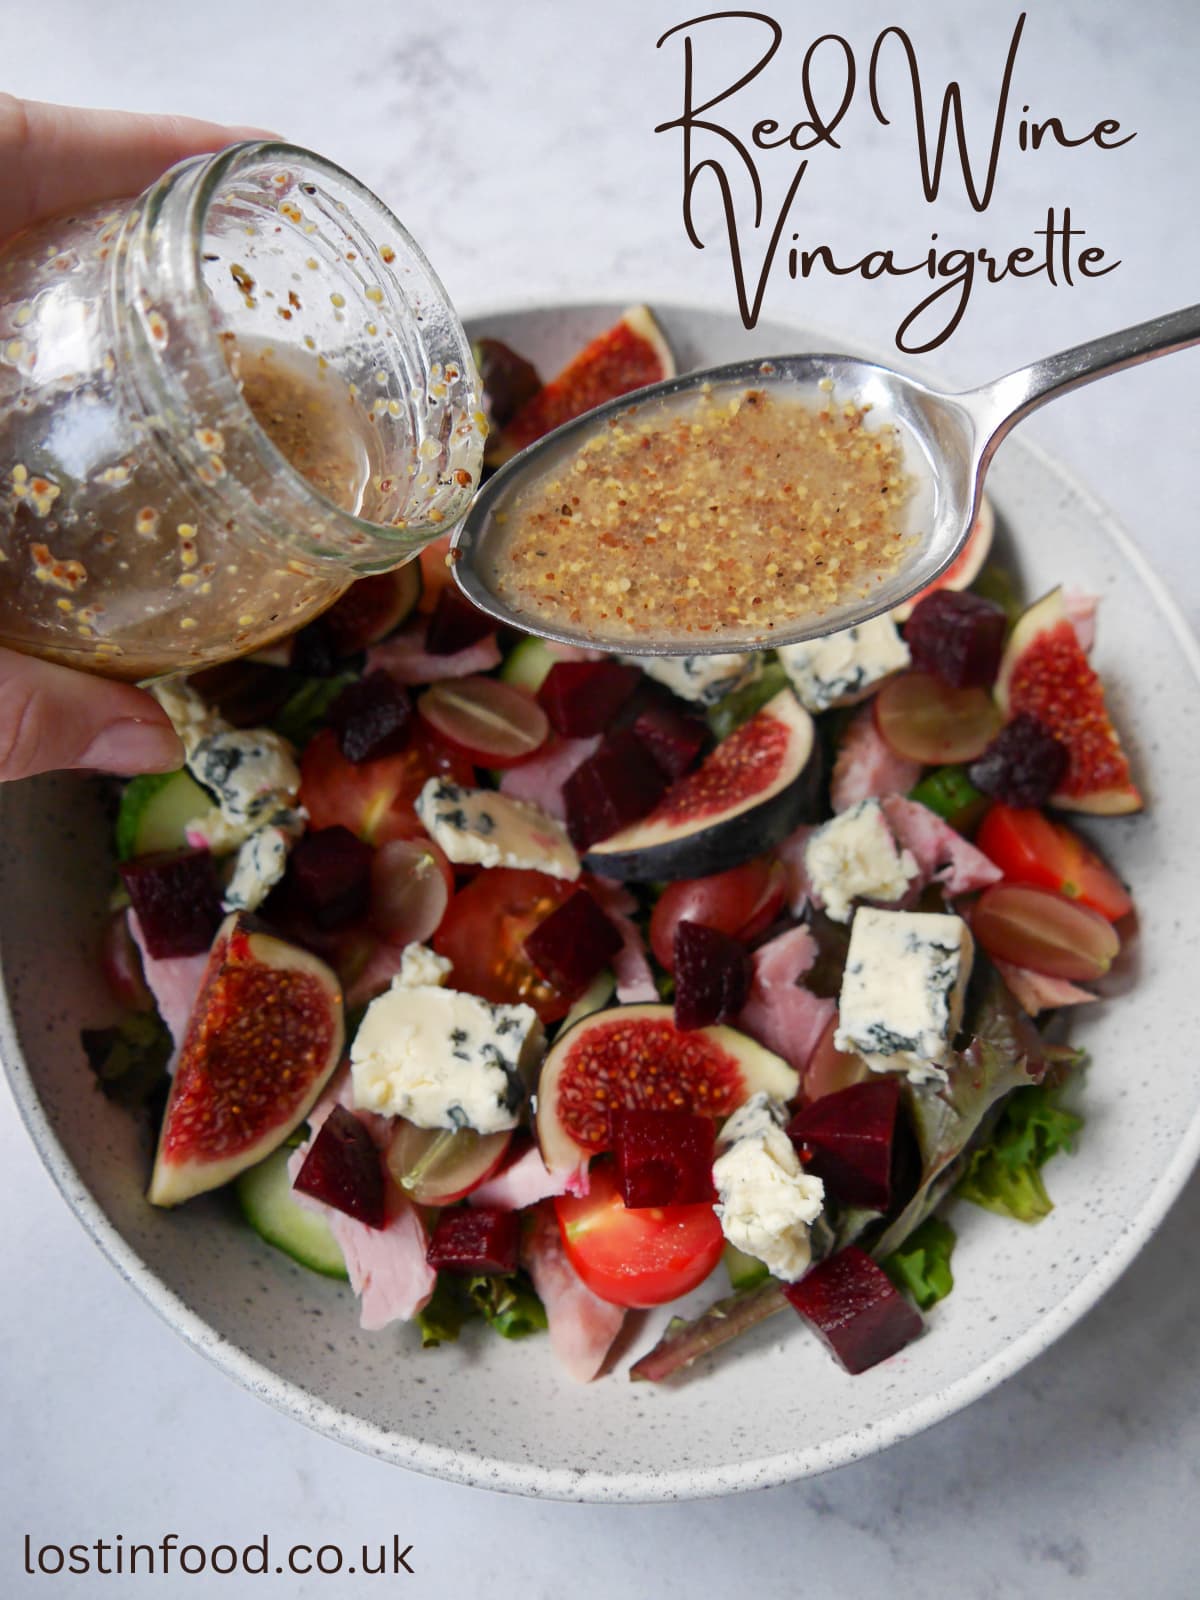 Pinnable image with recipe title and red wine vinaigrette being spooned over a ham, fig and blue cheese salad.